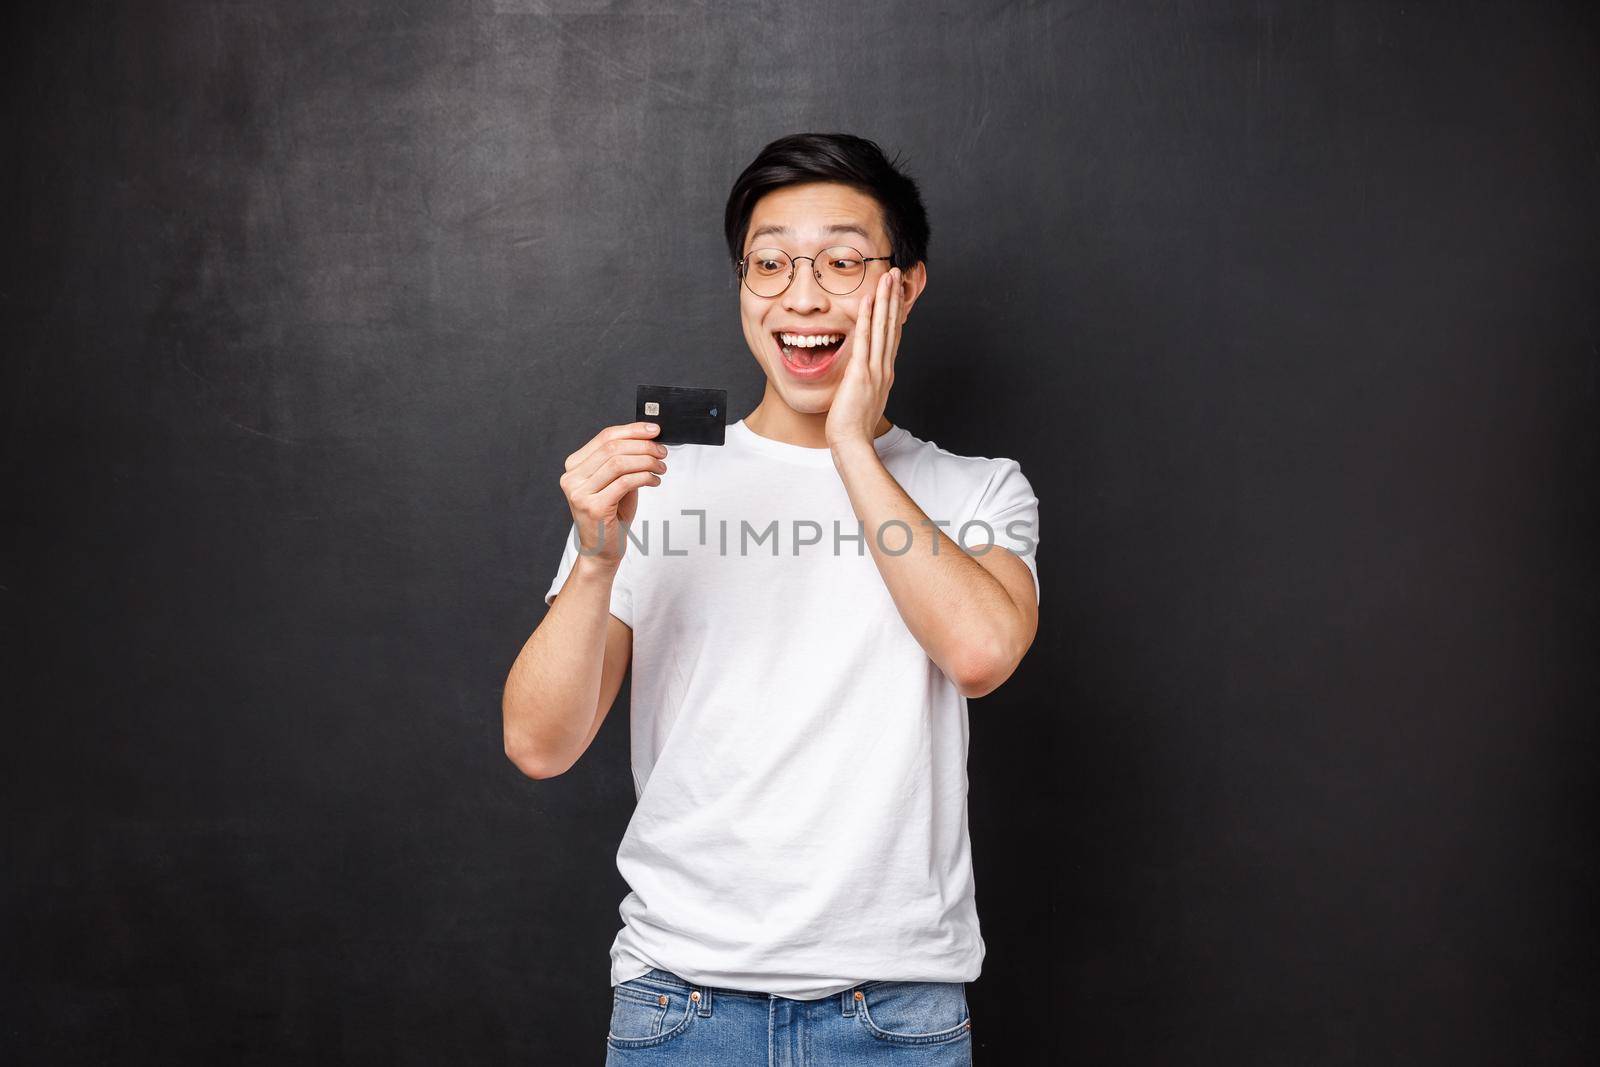 Bank, finance and payment concept. Portrait of happy charismatic asian man got his first credit card, receive paycheck, smiling amused as looking at it, standing black background.